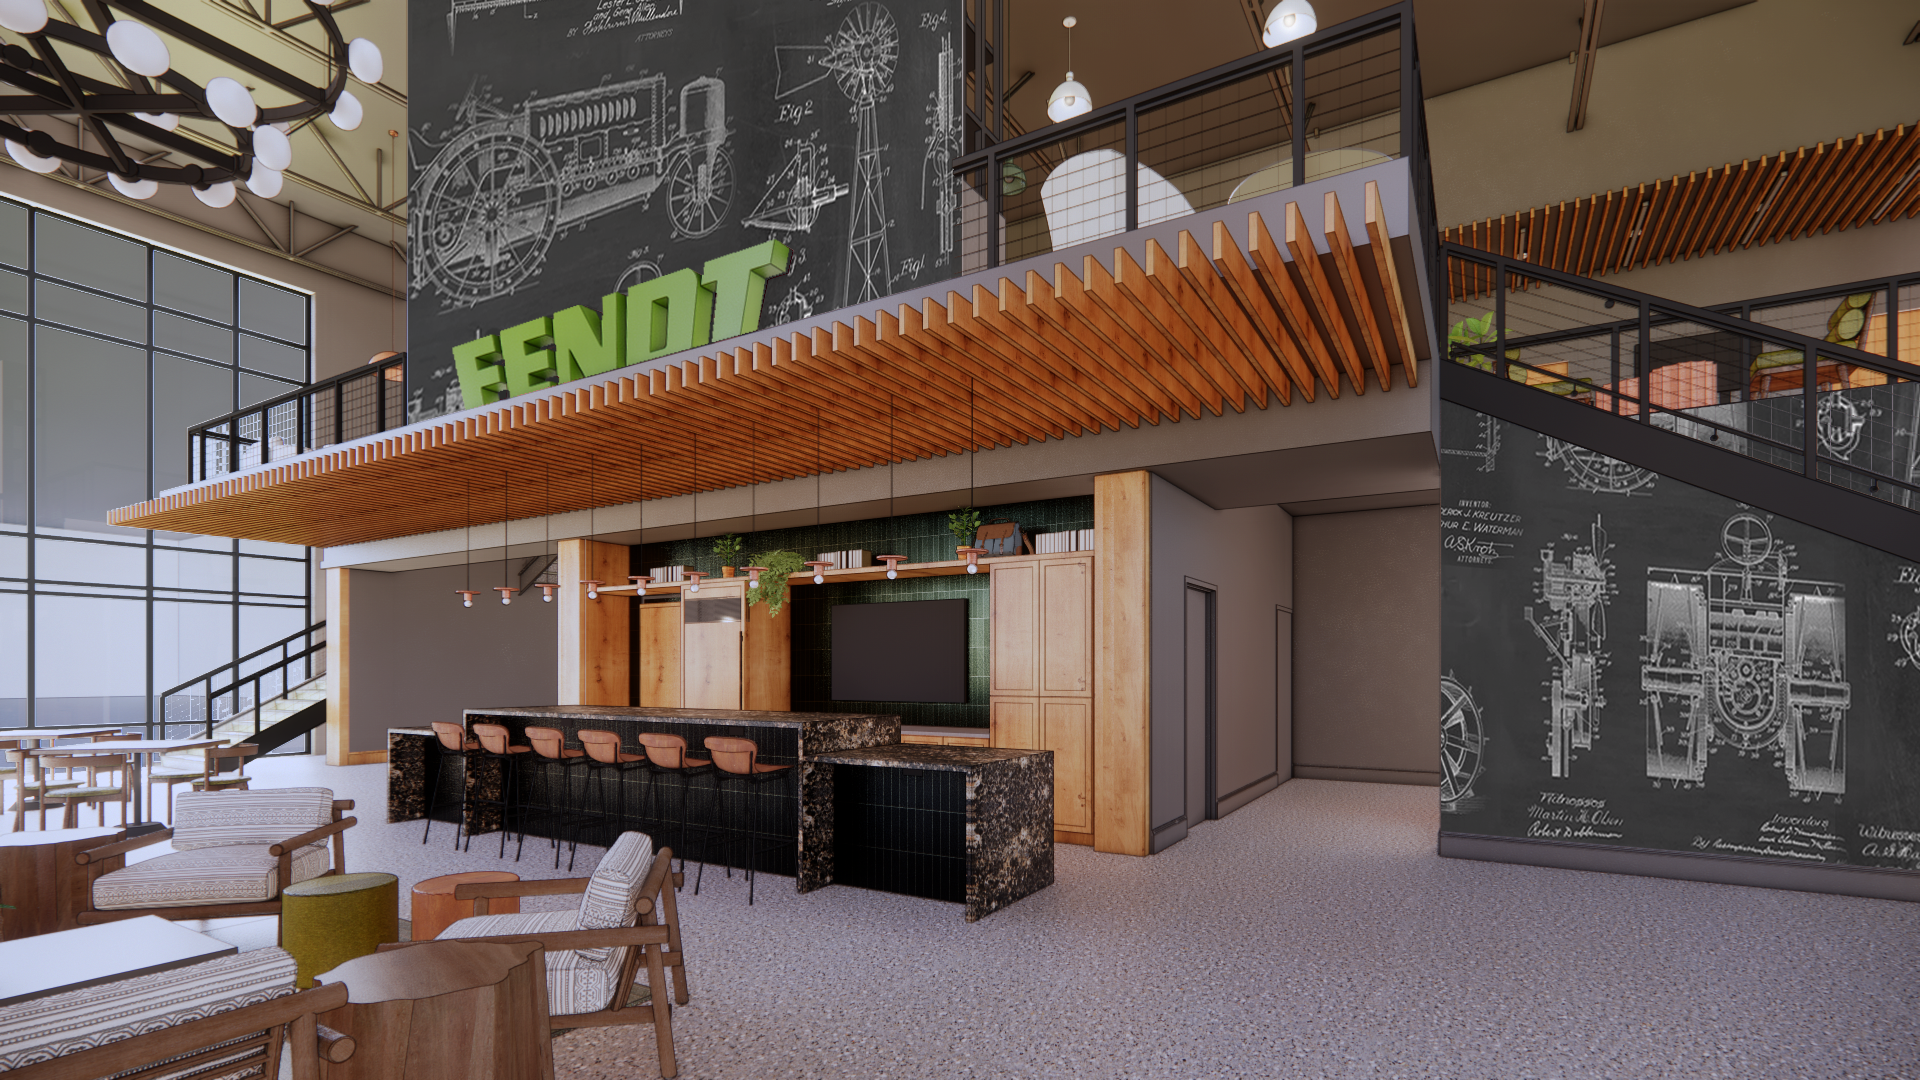 Jackson, Minnesota, Facility to Become Home of Fendt in North America with the Fendt Lodge Customer Experience Center